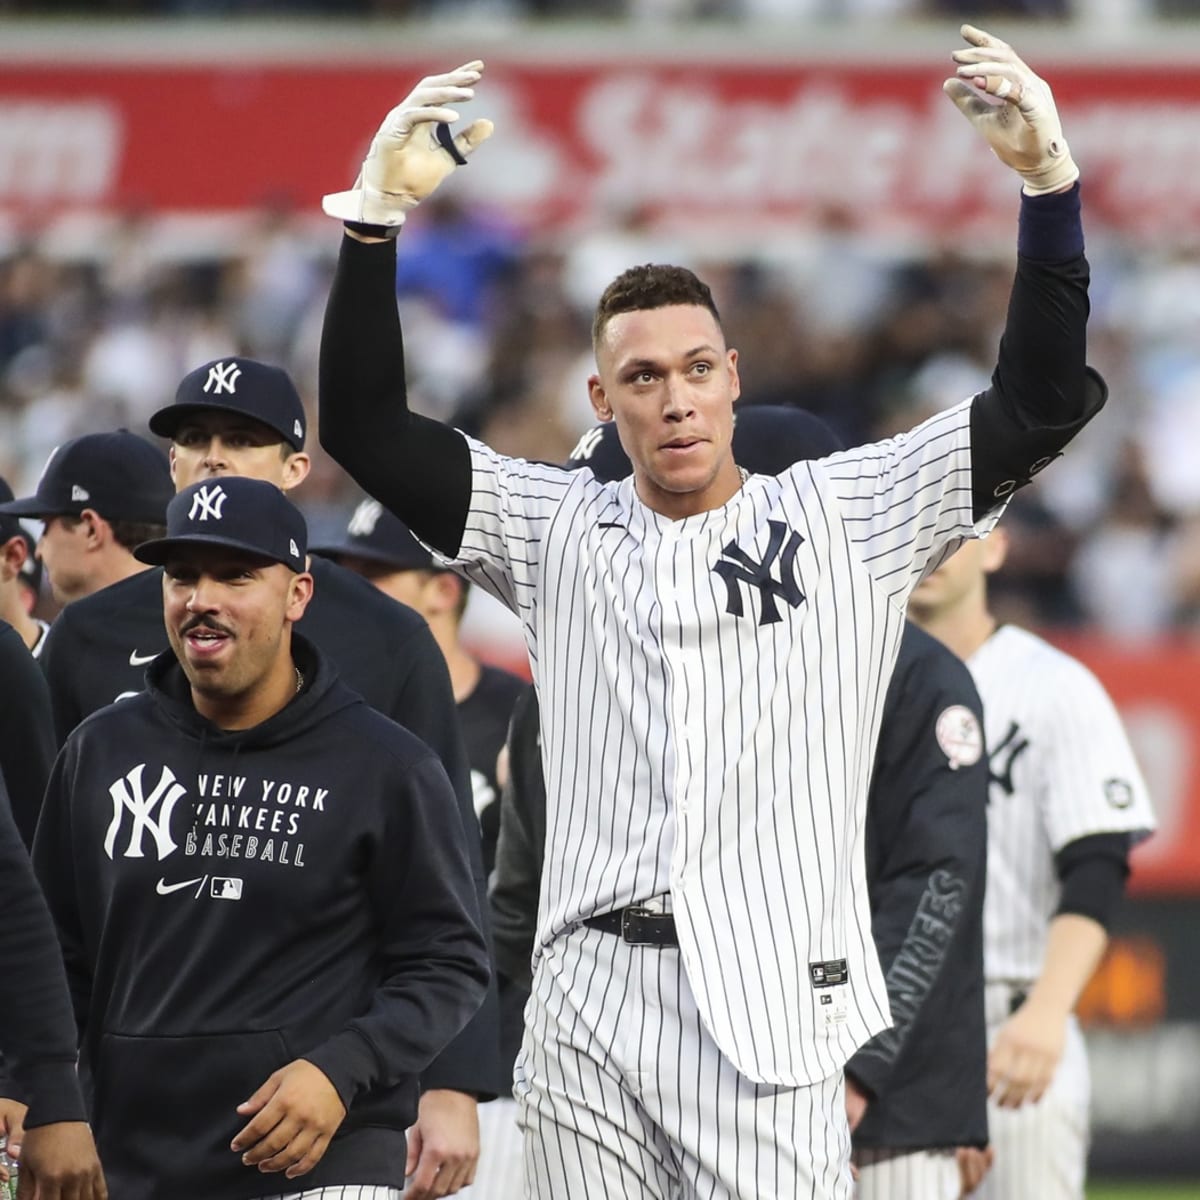 Aaron Judge lost a tooth while celebrating the Yankees' walk-off win 